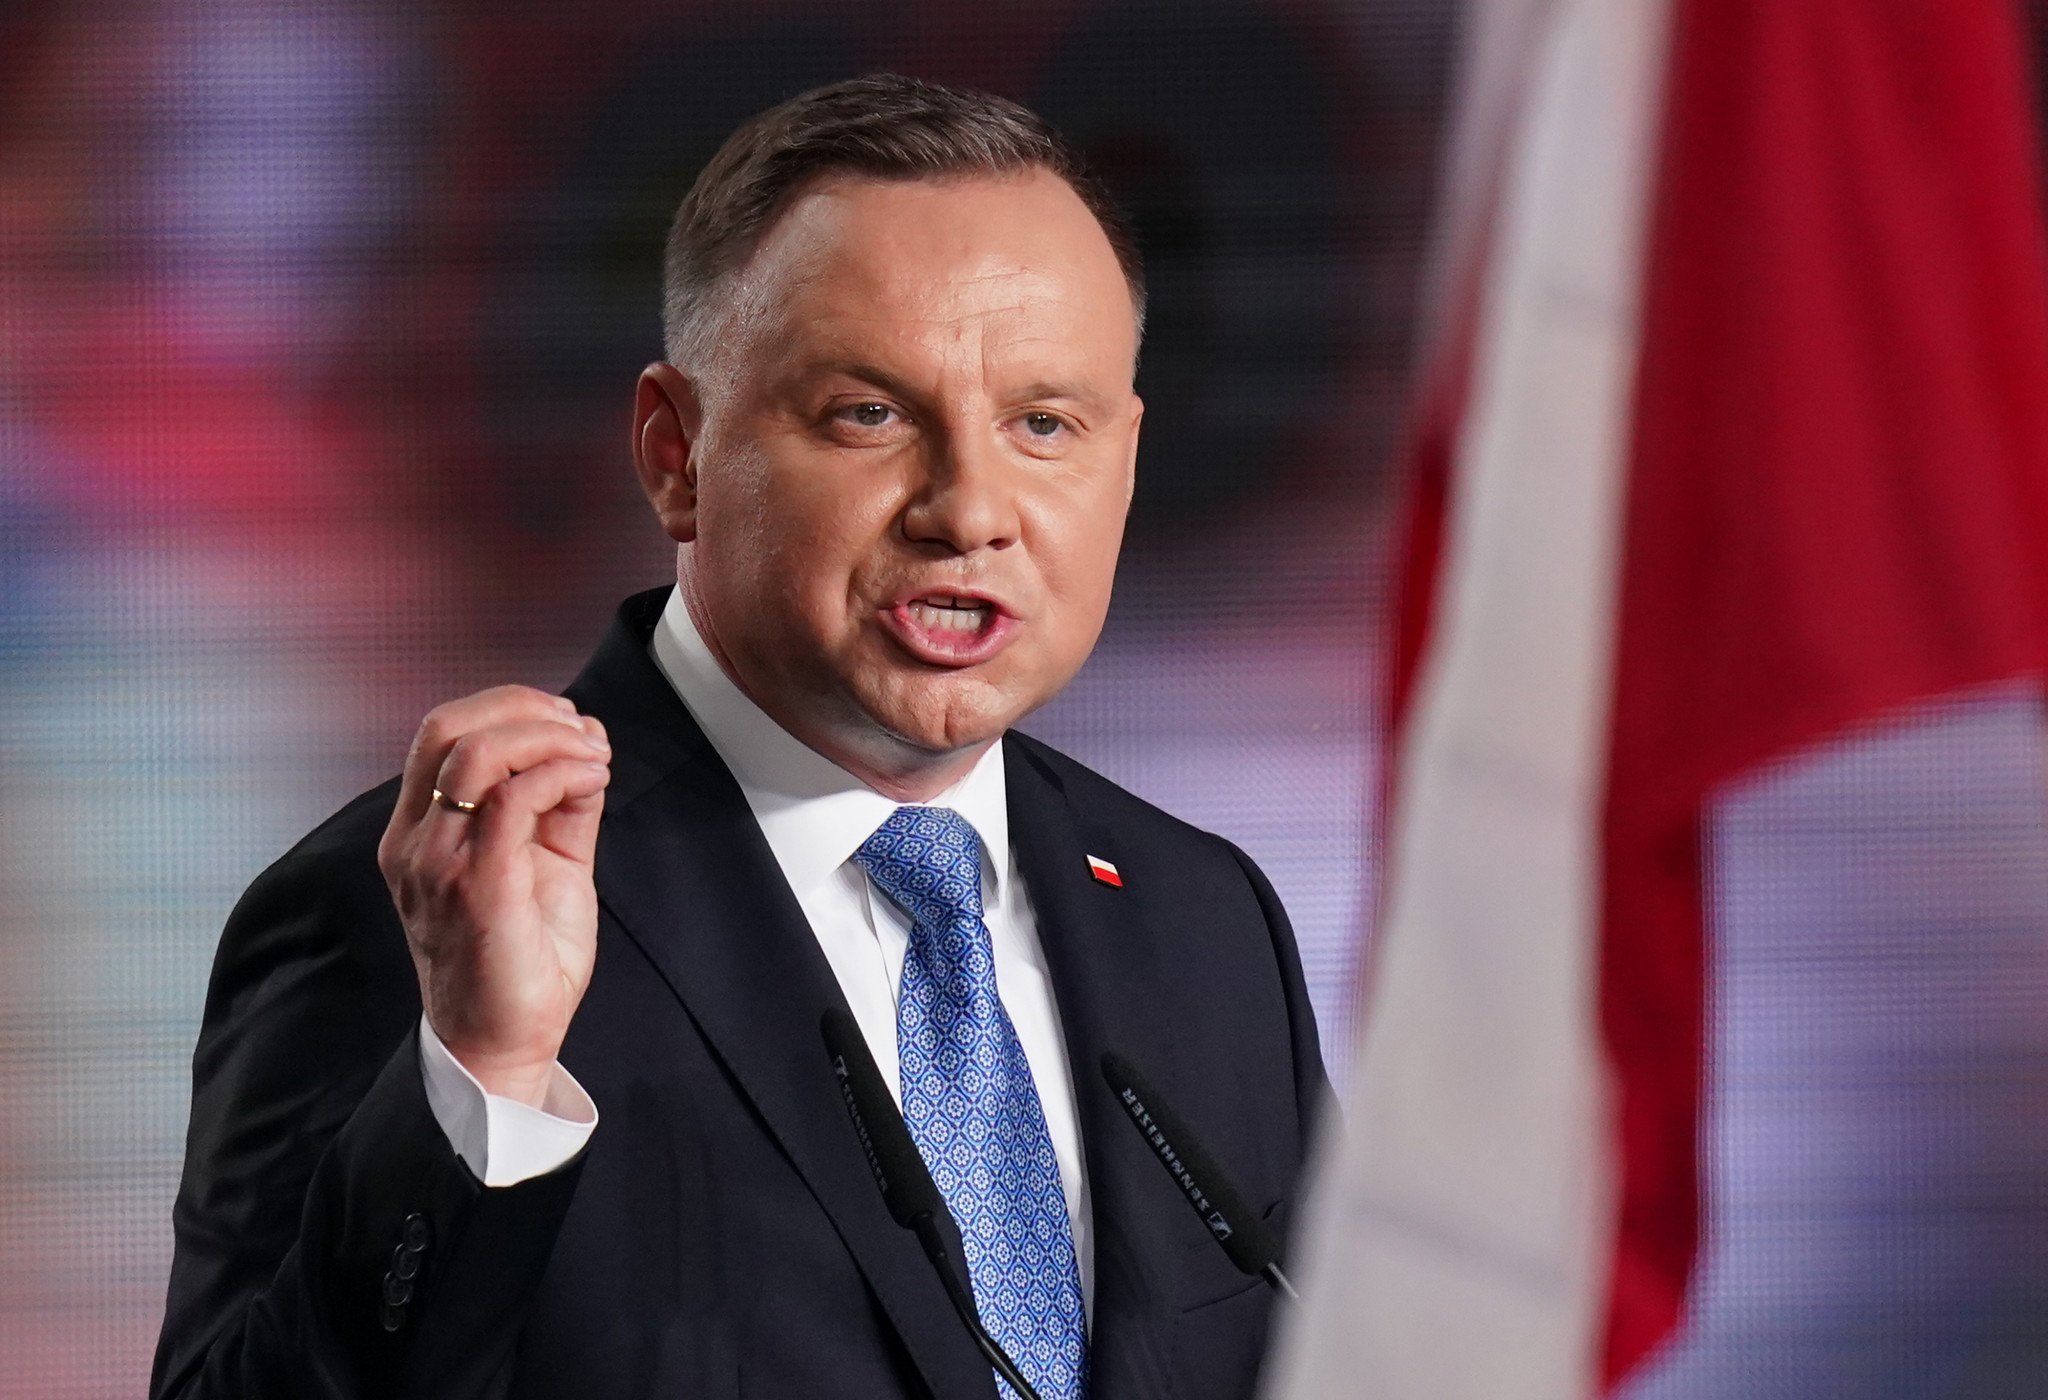 Polish President Andrzej Duda is a firm believer that Russia and Belarus should not be allowed to compete at Paris 2024 ©Getty Images